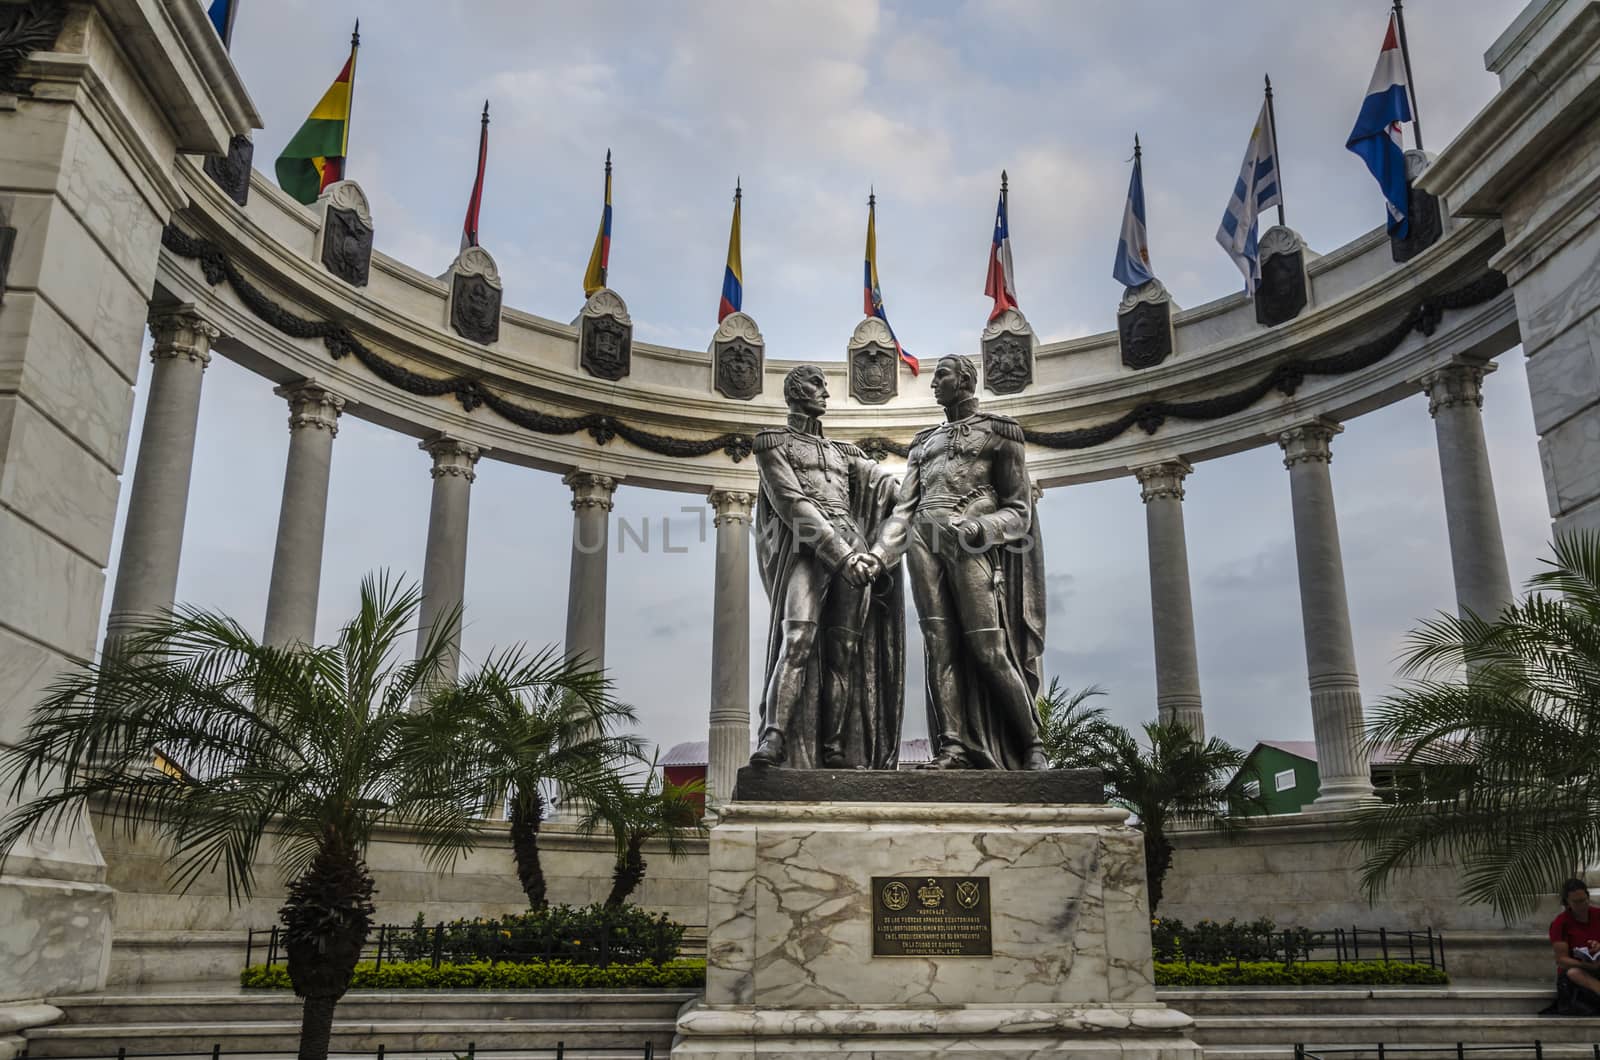 In Guayaquil to the side of the Guayas river is this monument to the liberators of South America